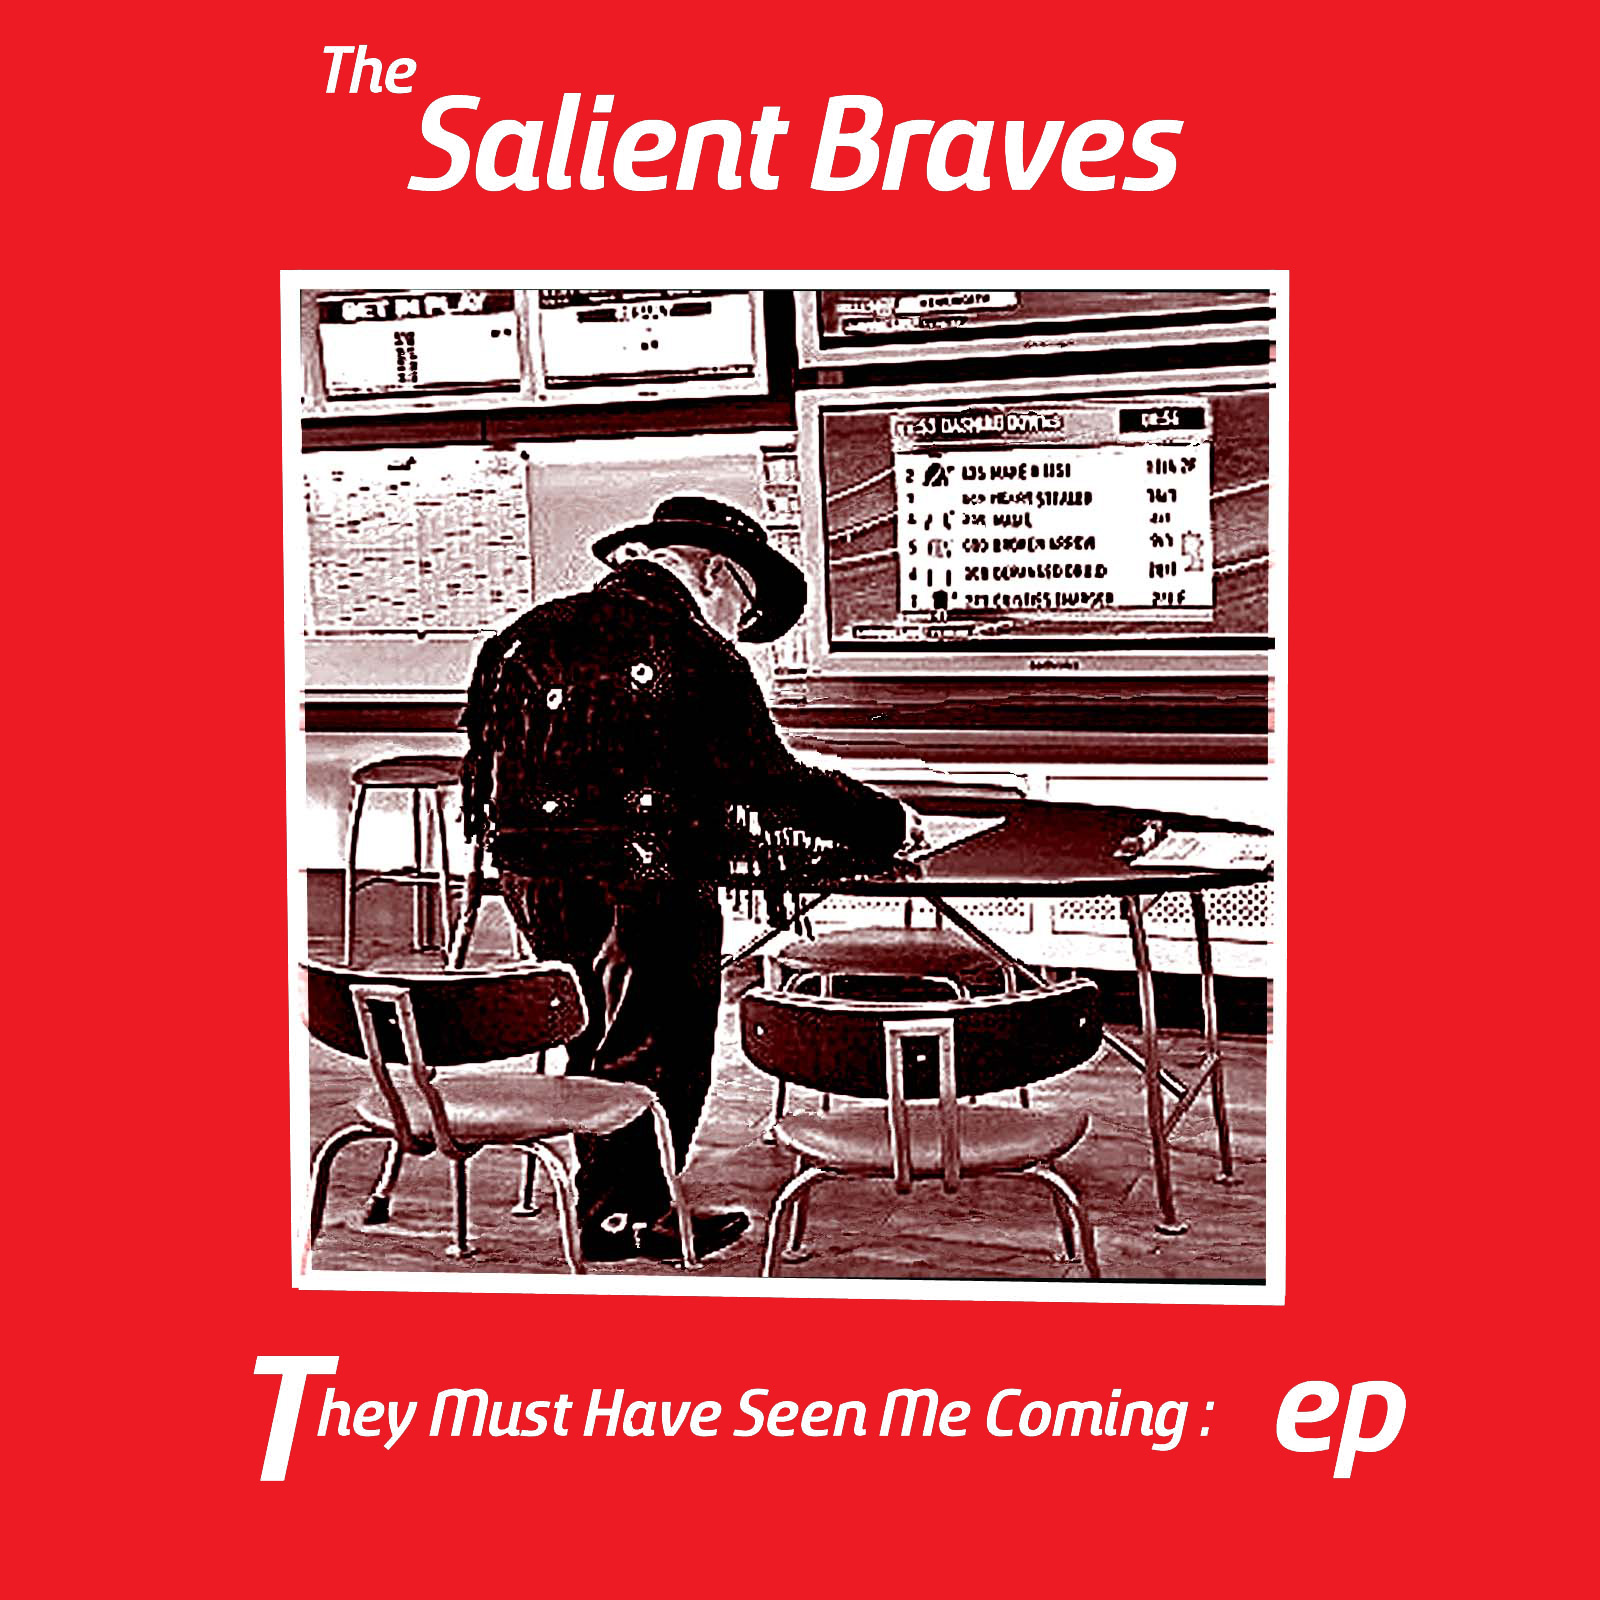 New Salient Braves EP - They Must Have Seen Me Coming